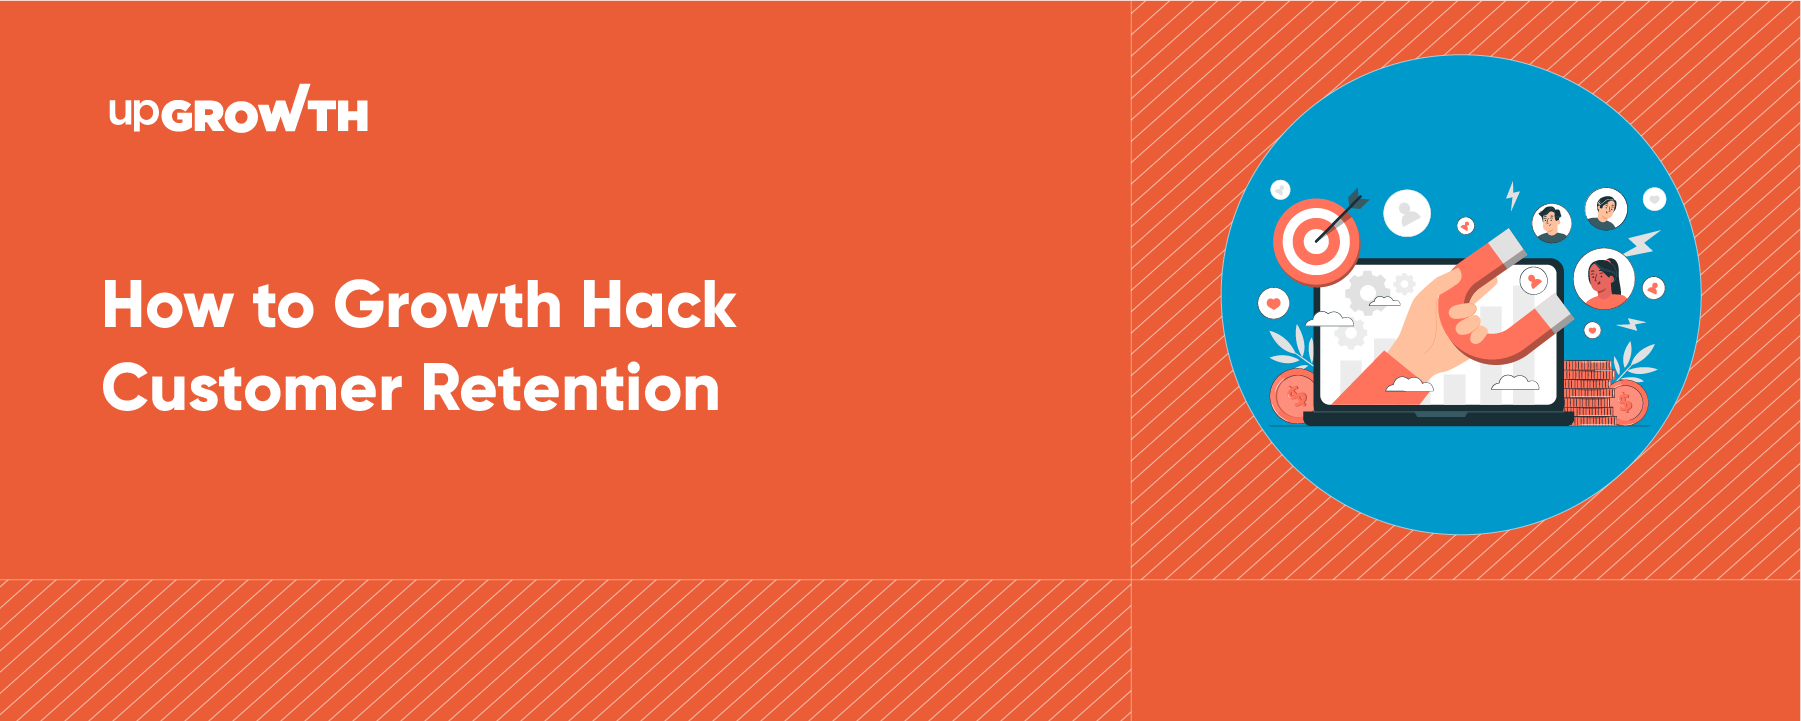 How to Growth Hack Customer Retention